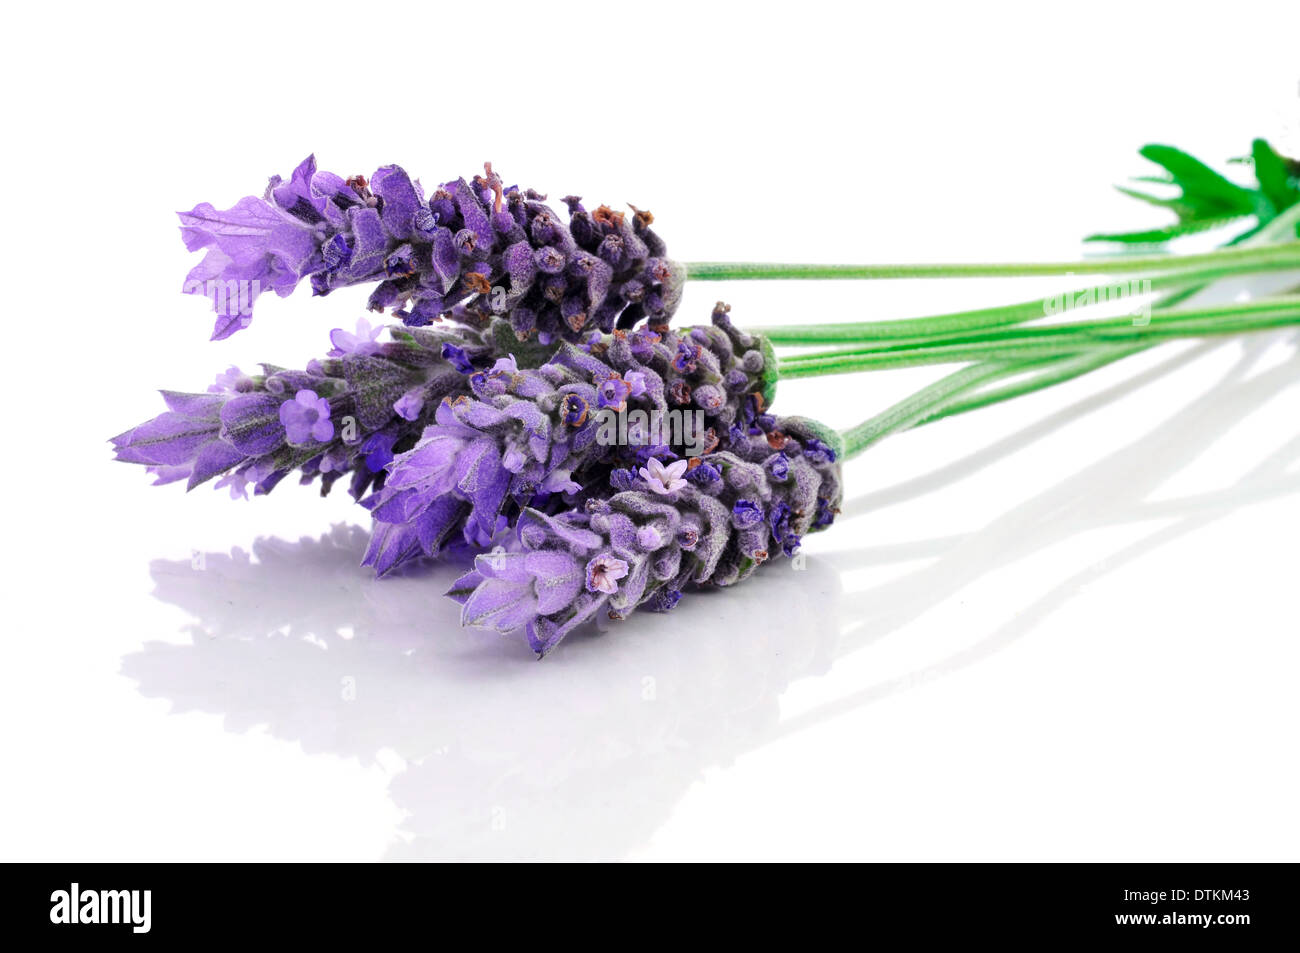 some lavender flowers on a white background Stock Photo